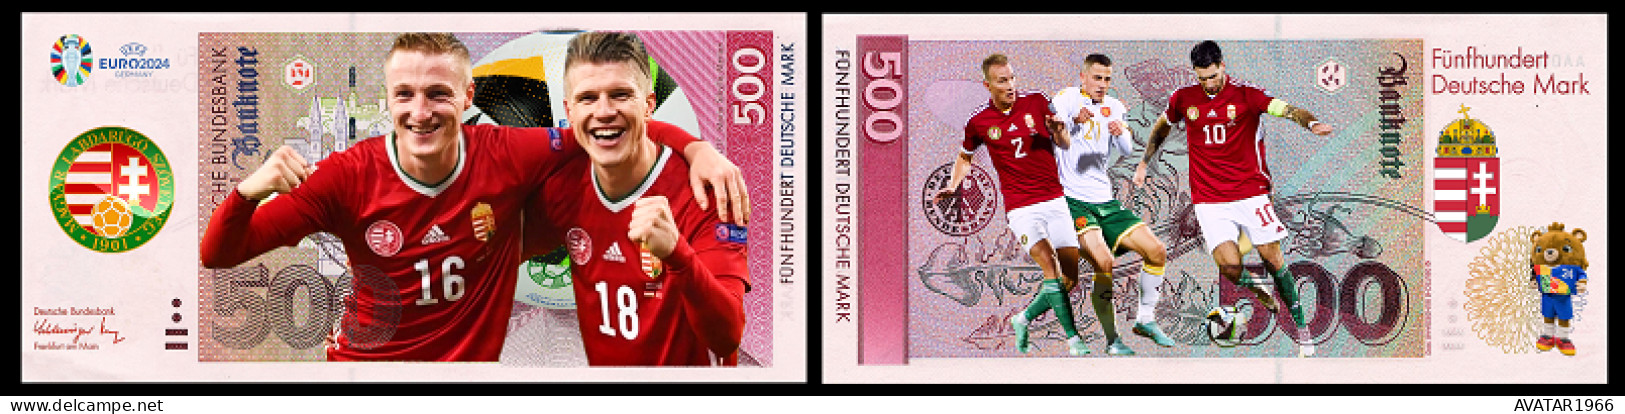 UEFA European Football Championship 2024 qualified country Hungary 8 pieces Germany fantasy paper money